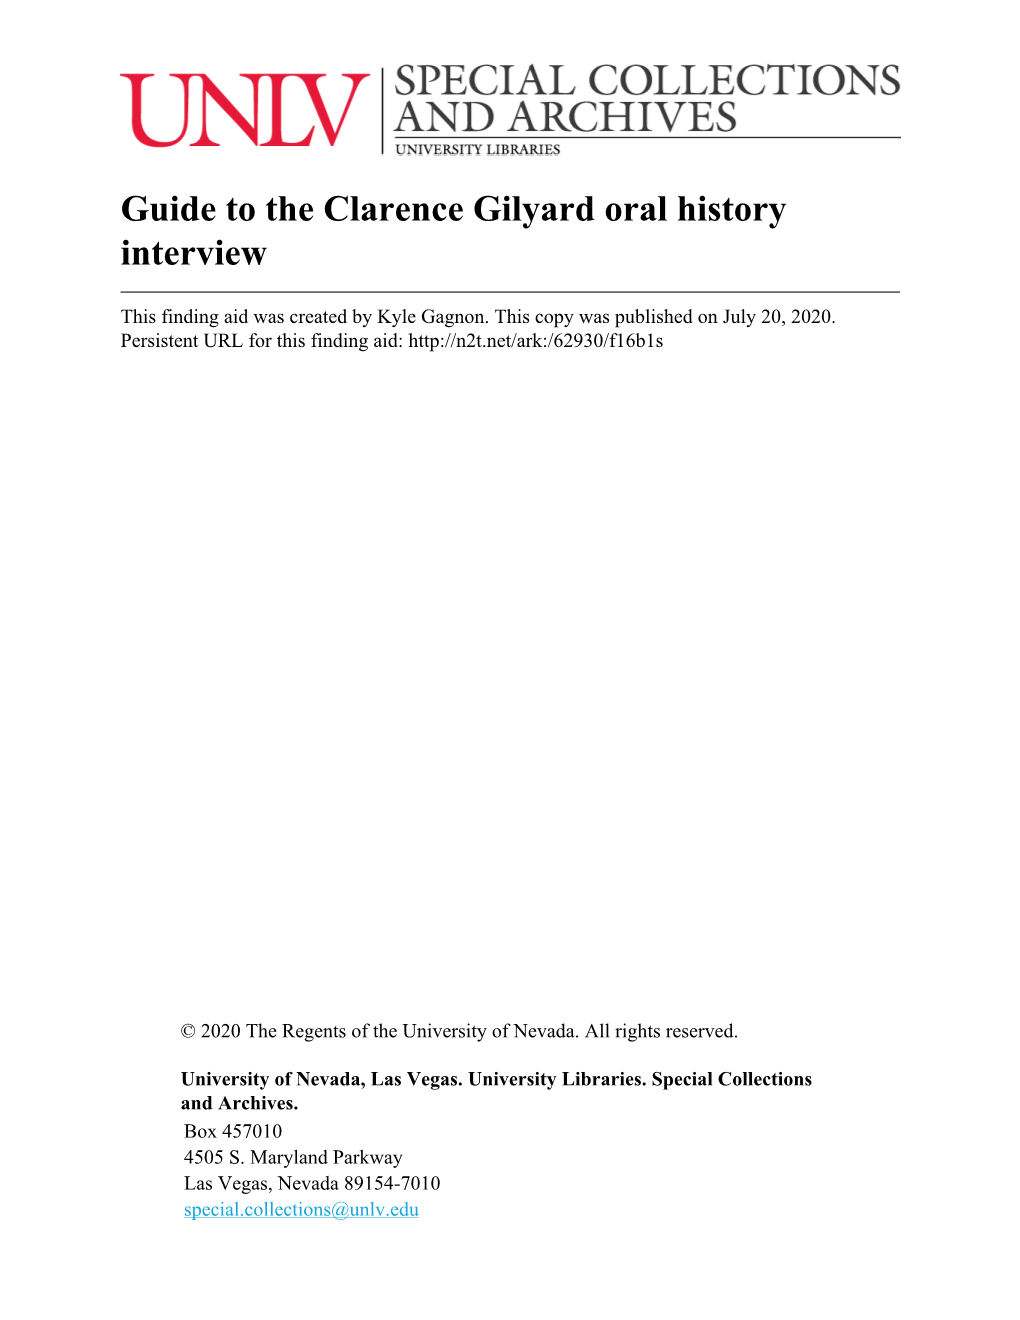 Guide to the Clarence Gilyard Oral History Interview